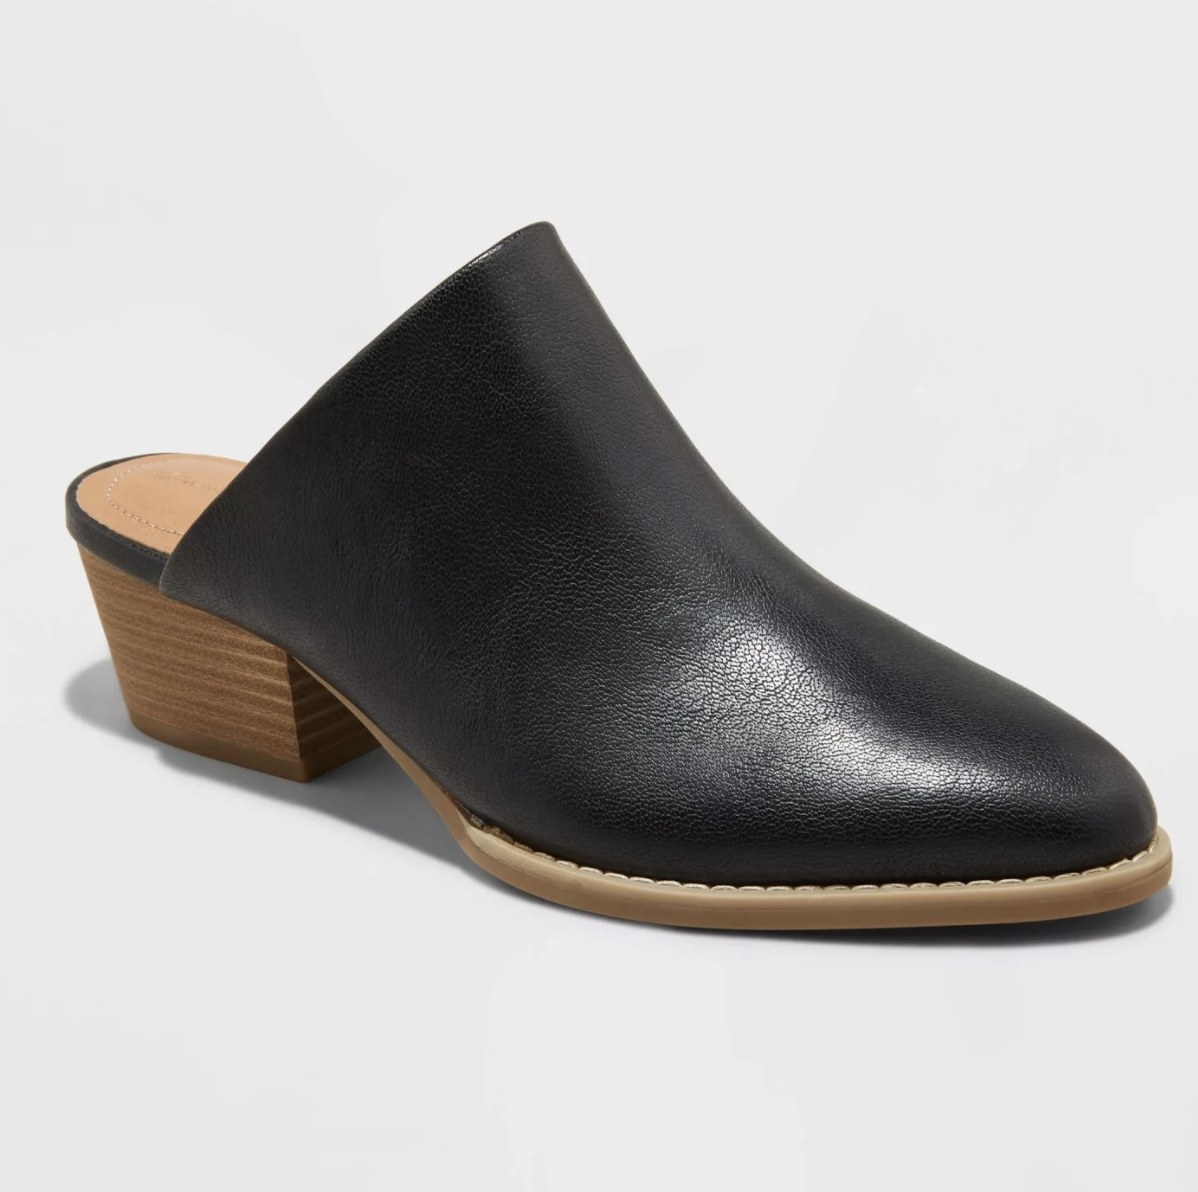 The black pointed toe boots have a tan insole and brown heel